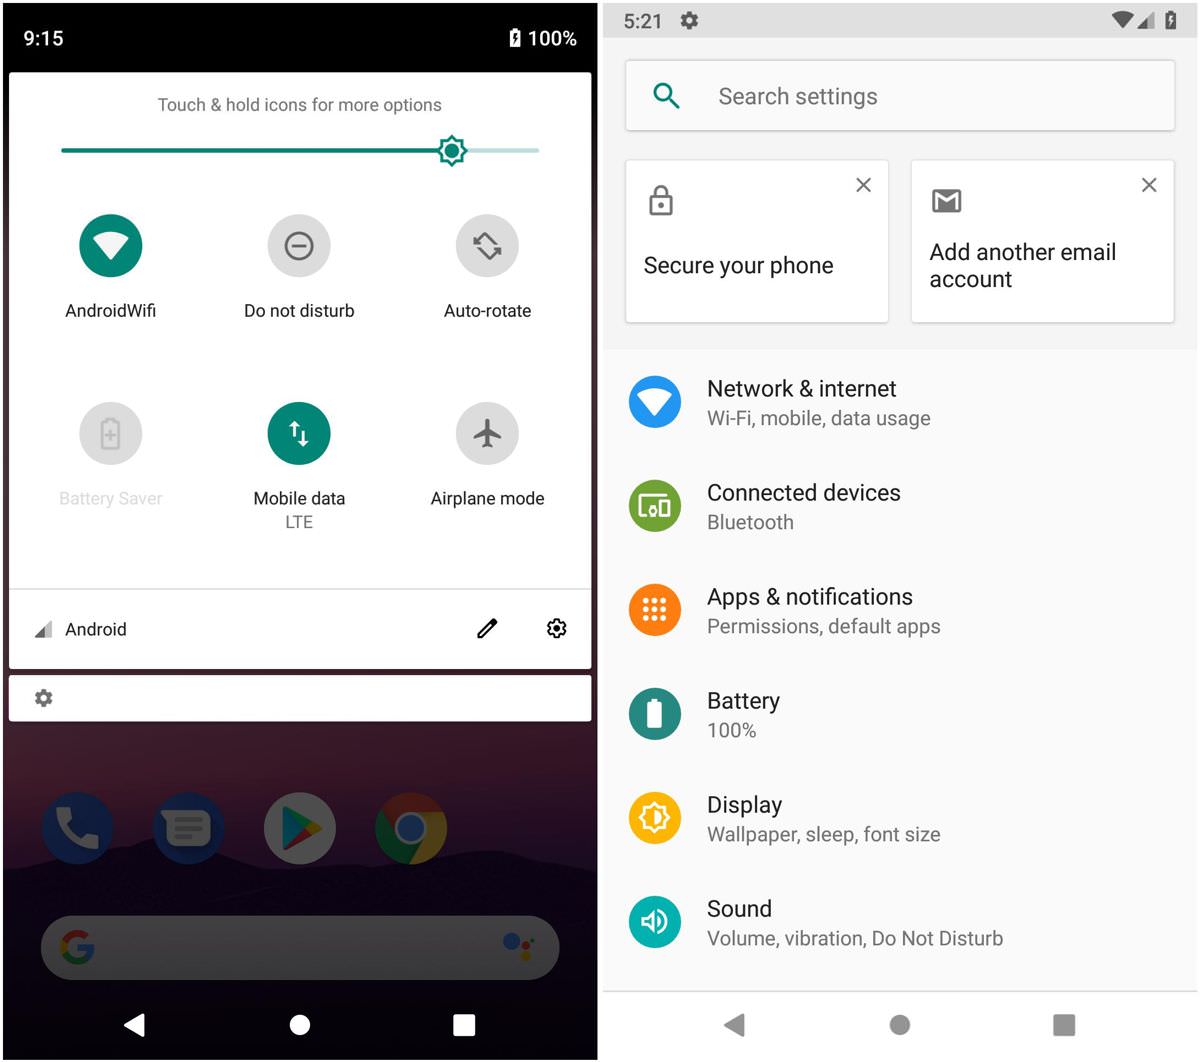 Improved material design in Android Pie